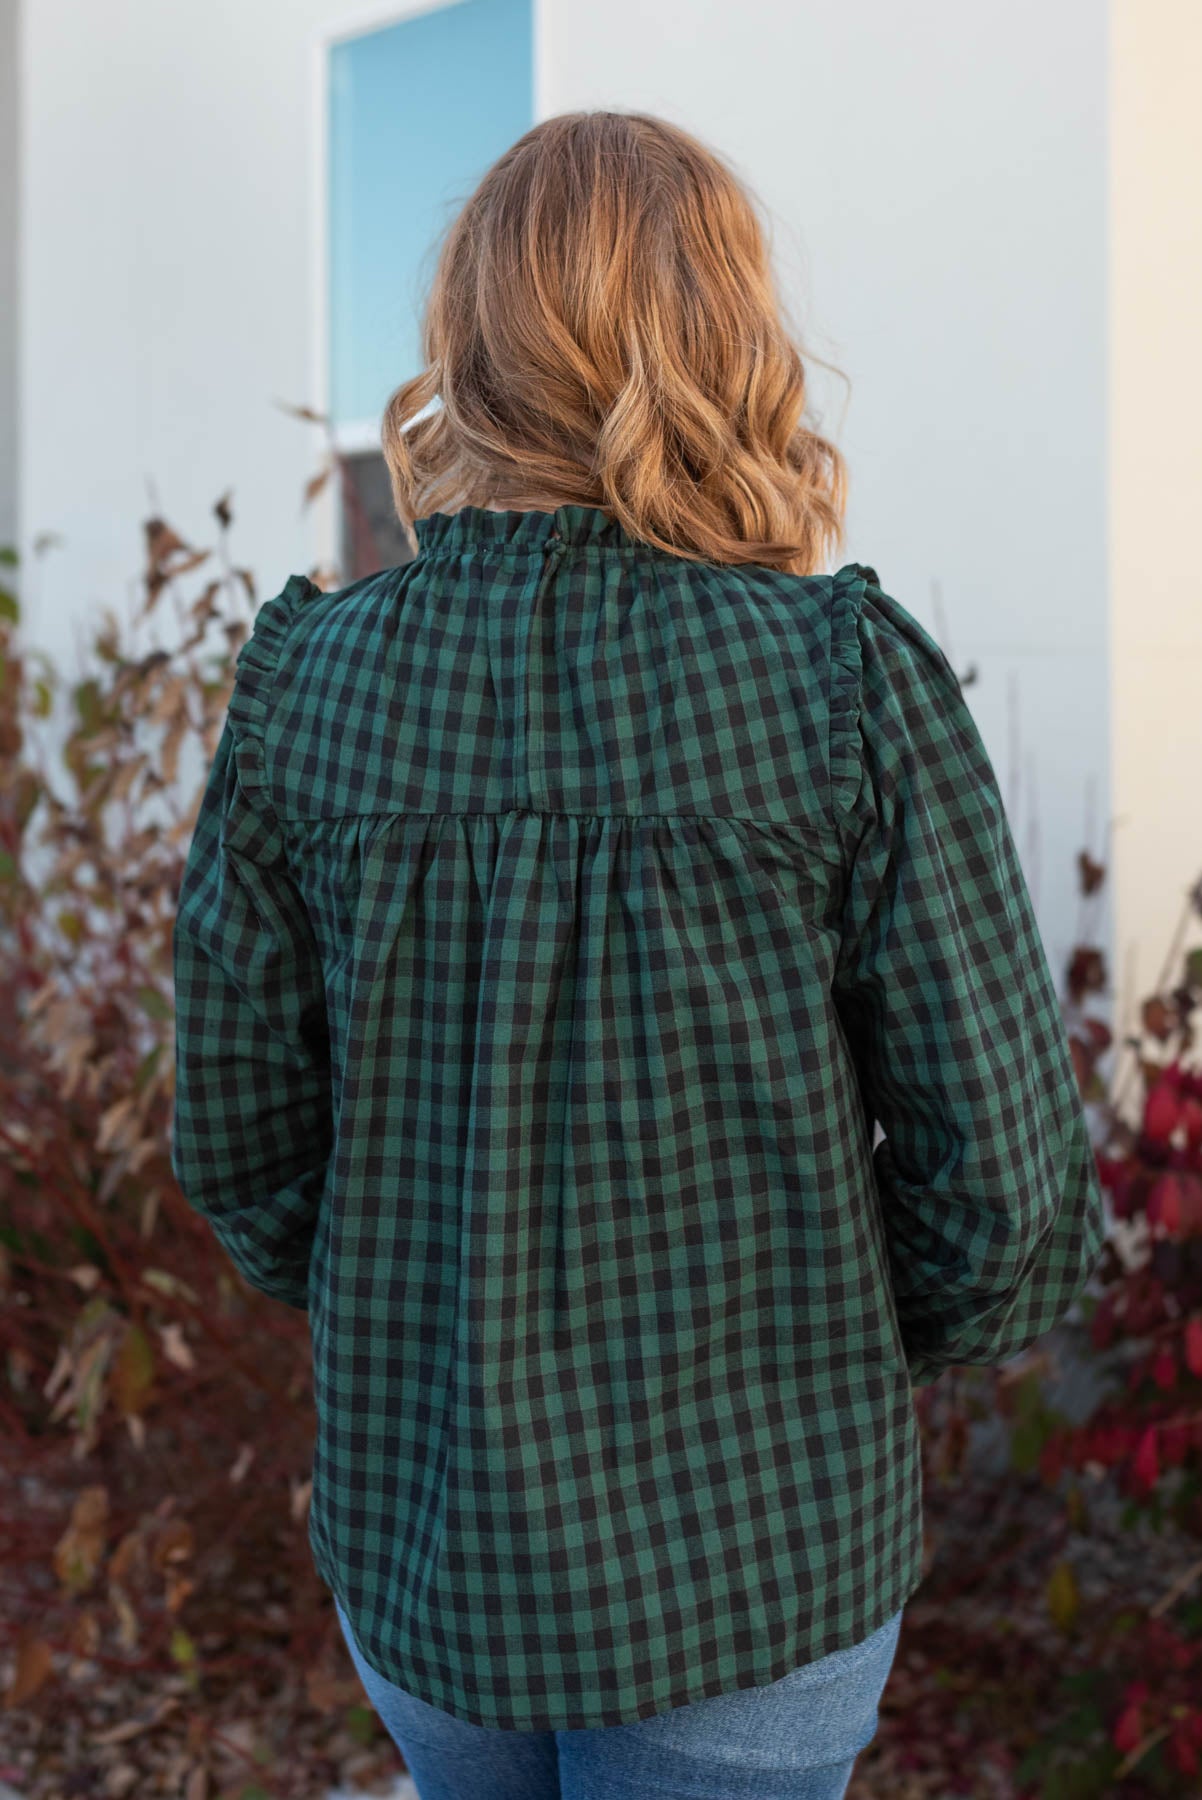 Back view of the hunter green ruffle blouse